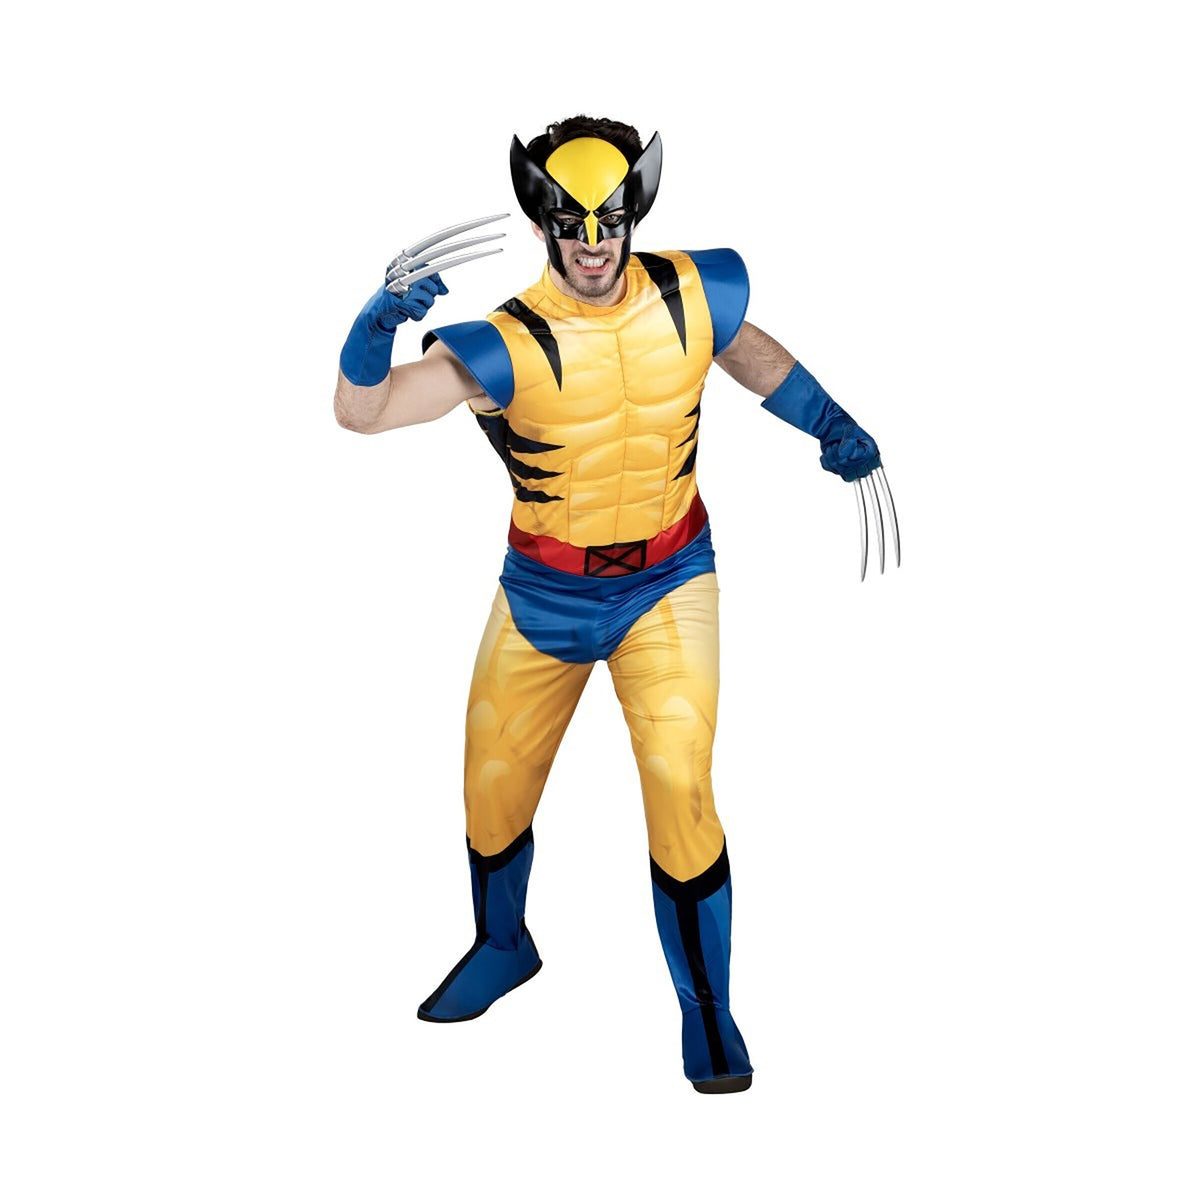 KROEGER Costumes Marvel Wolverine Qualux Costume for Adults, Jumpsuit and Mask